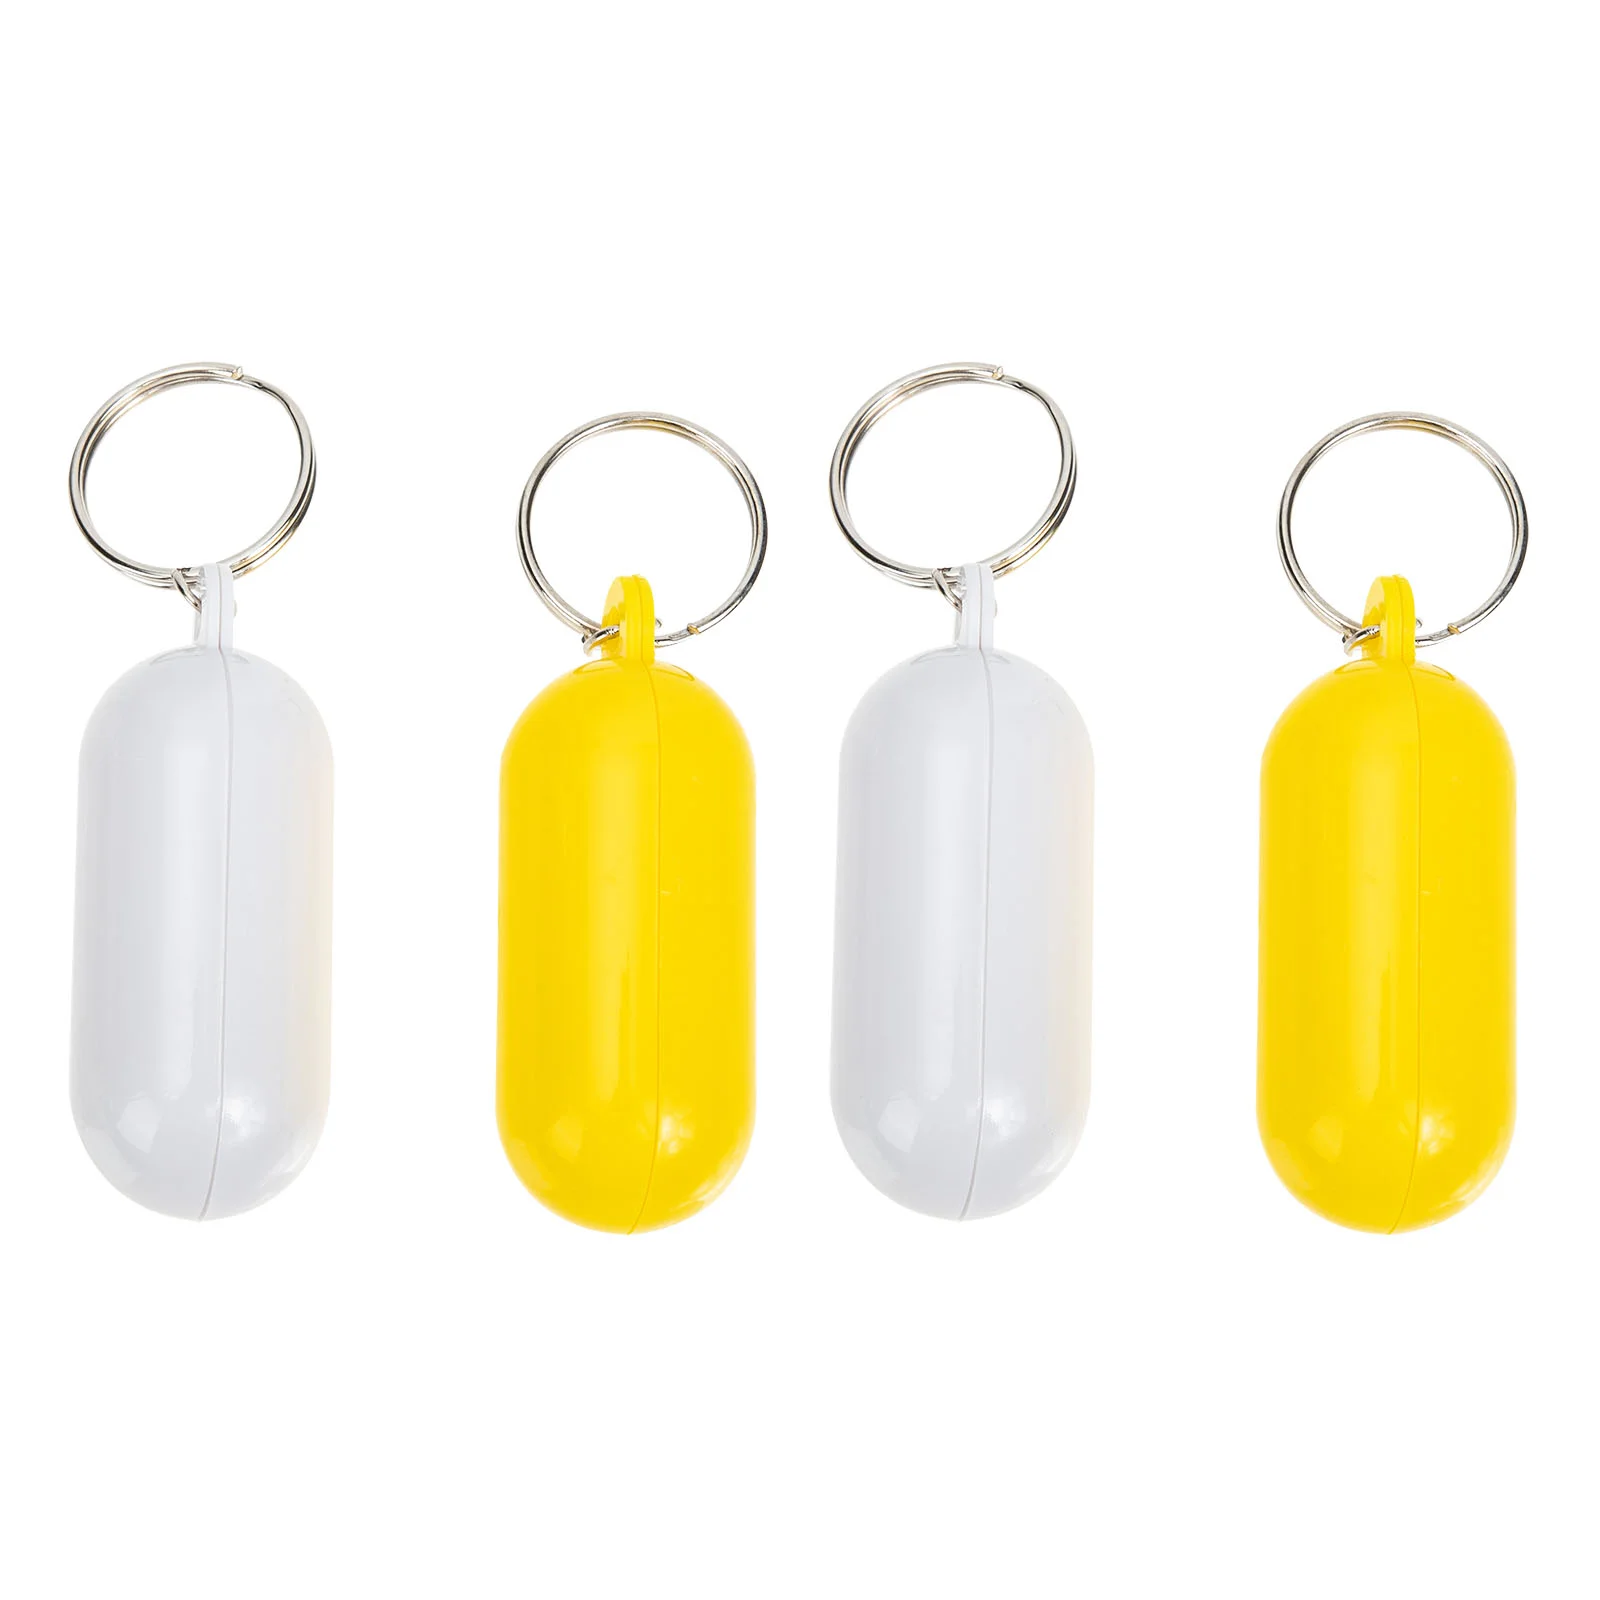 

4 Pcs Floating Keychain Boat Keys Holder Bags Hanger Water Sports Abs Hanging Ornament Anti-Lost Ring